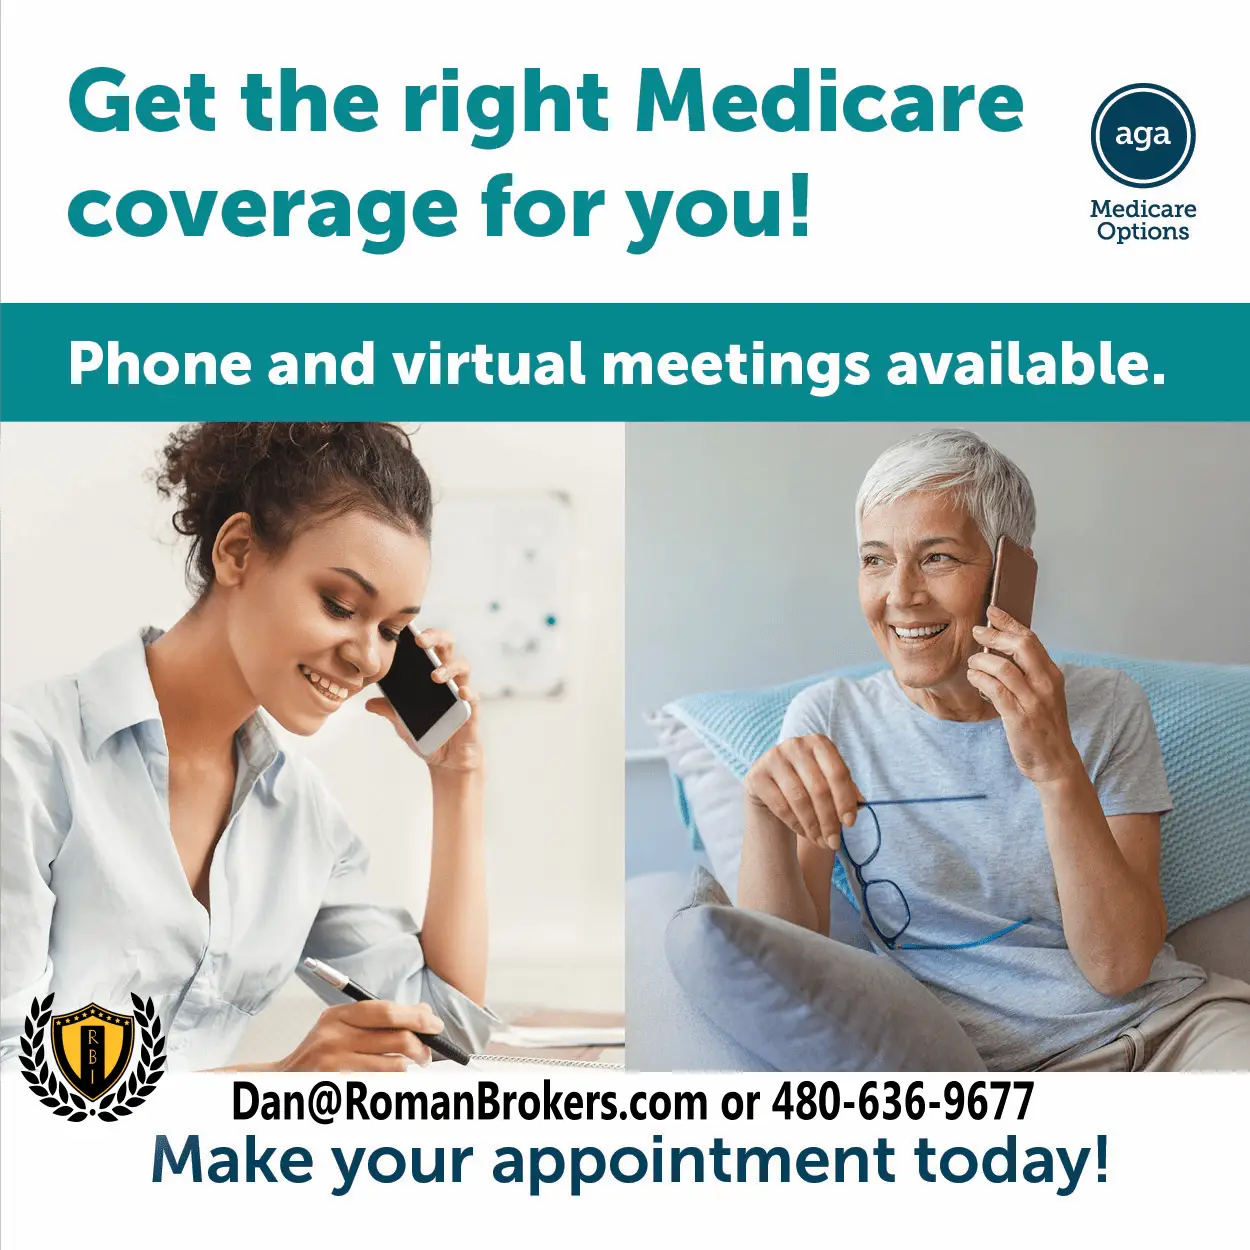 Get Started with Medicare